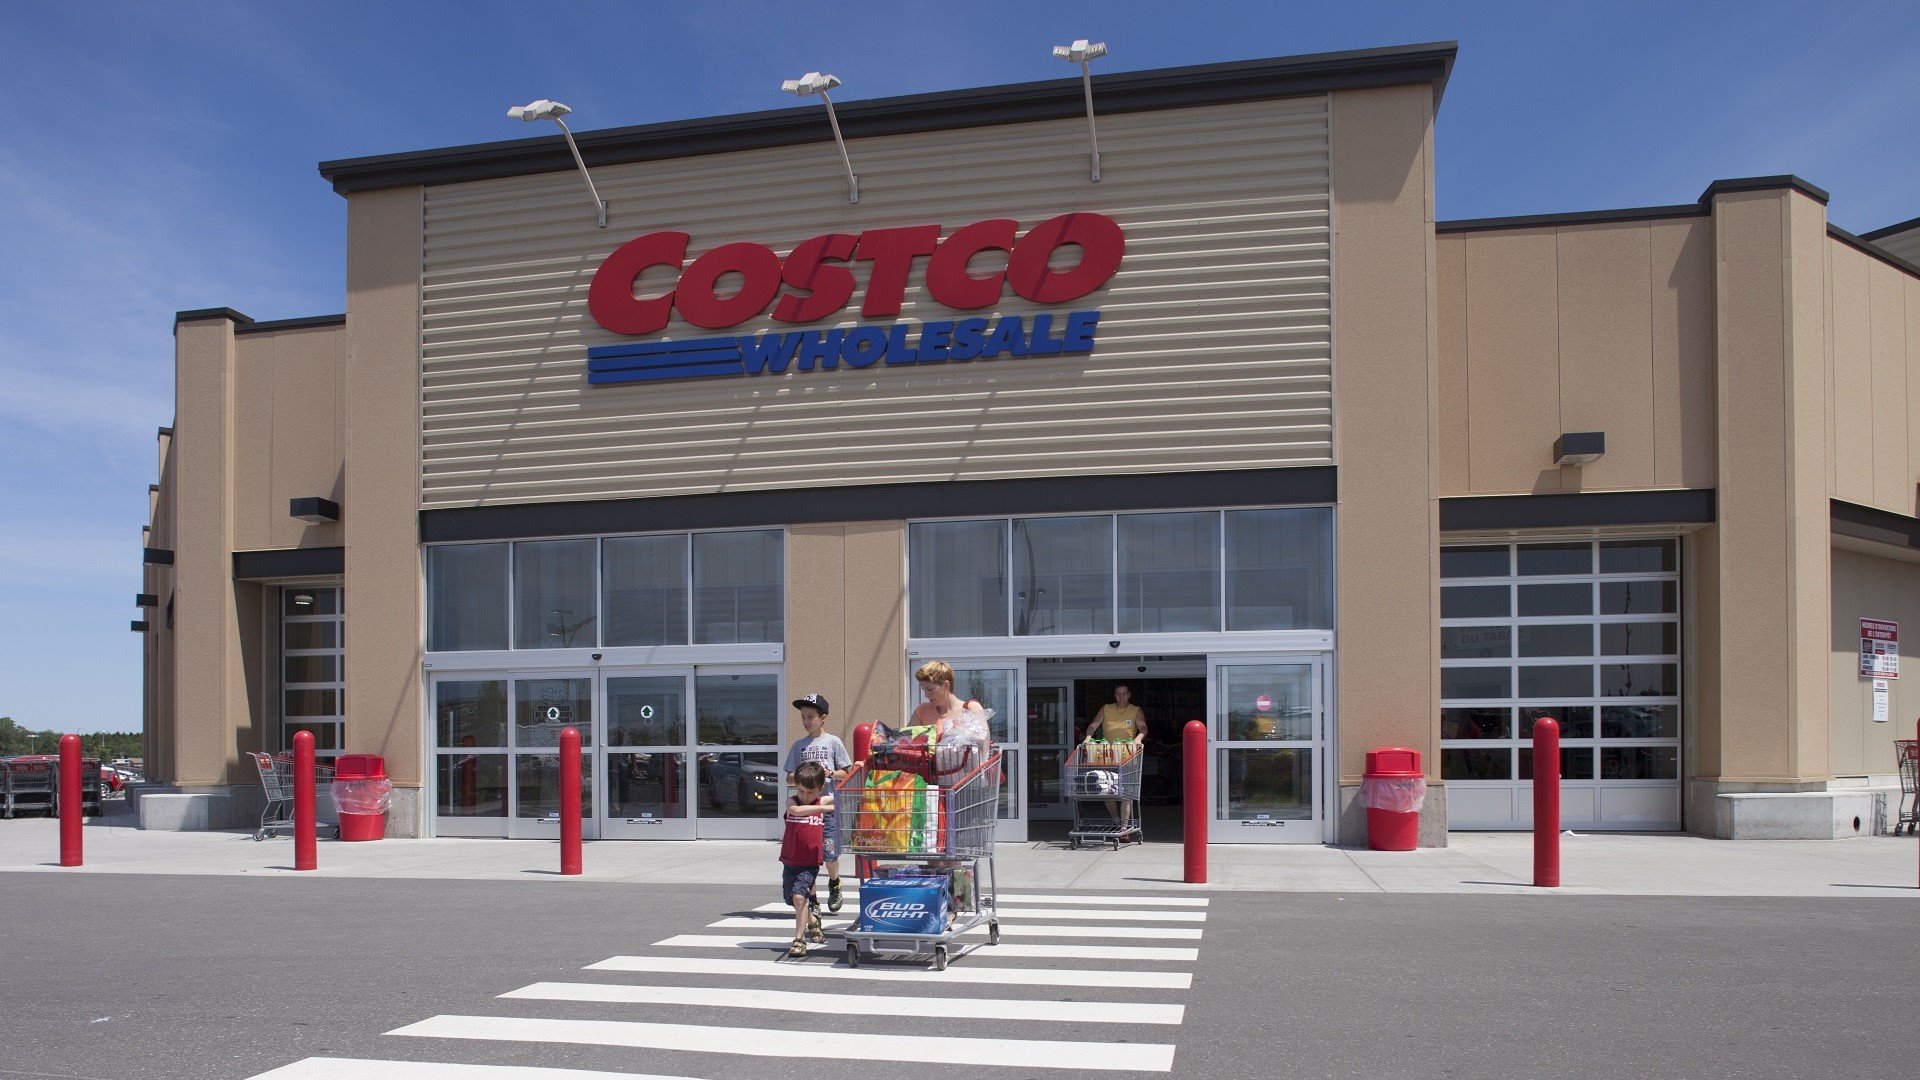 21 Items That Are Always Cheaper at Costco